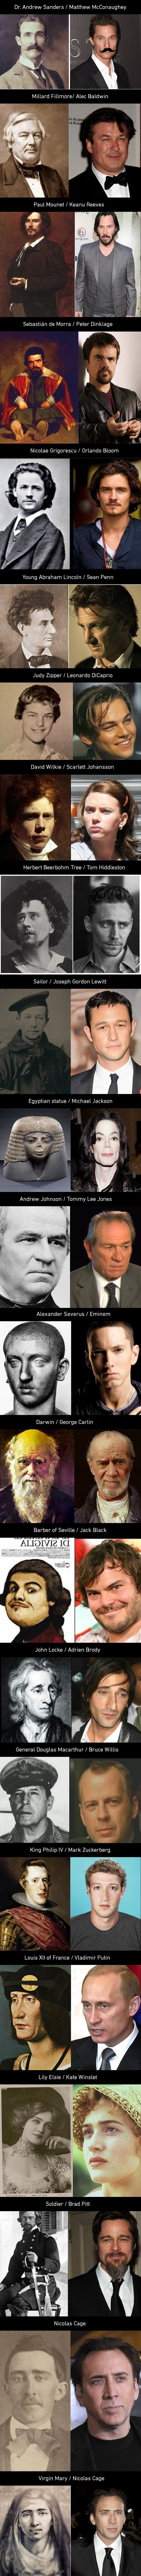 Celebs and their historical twins